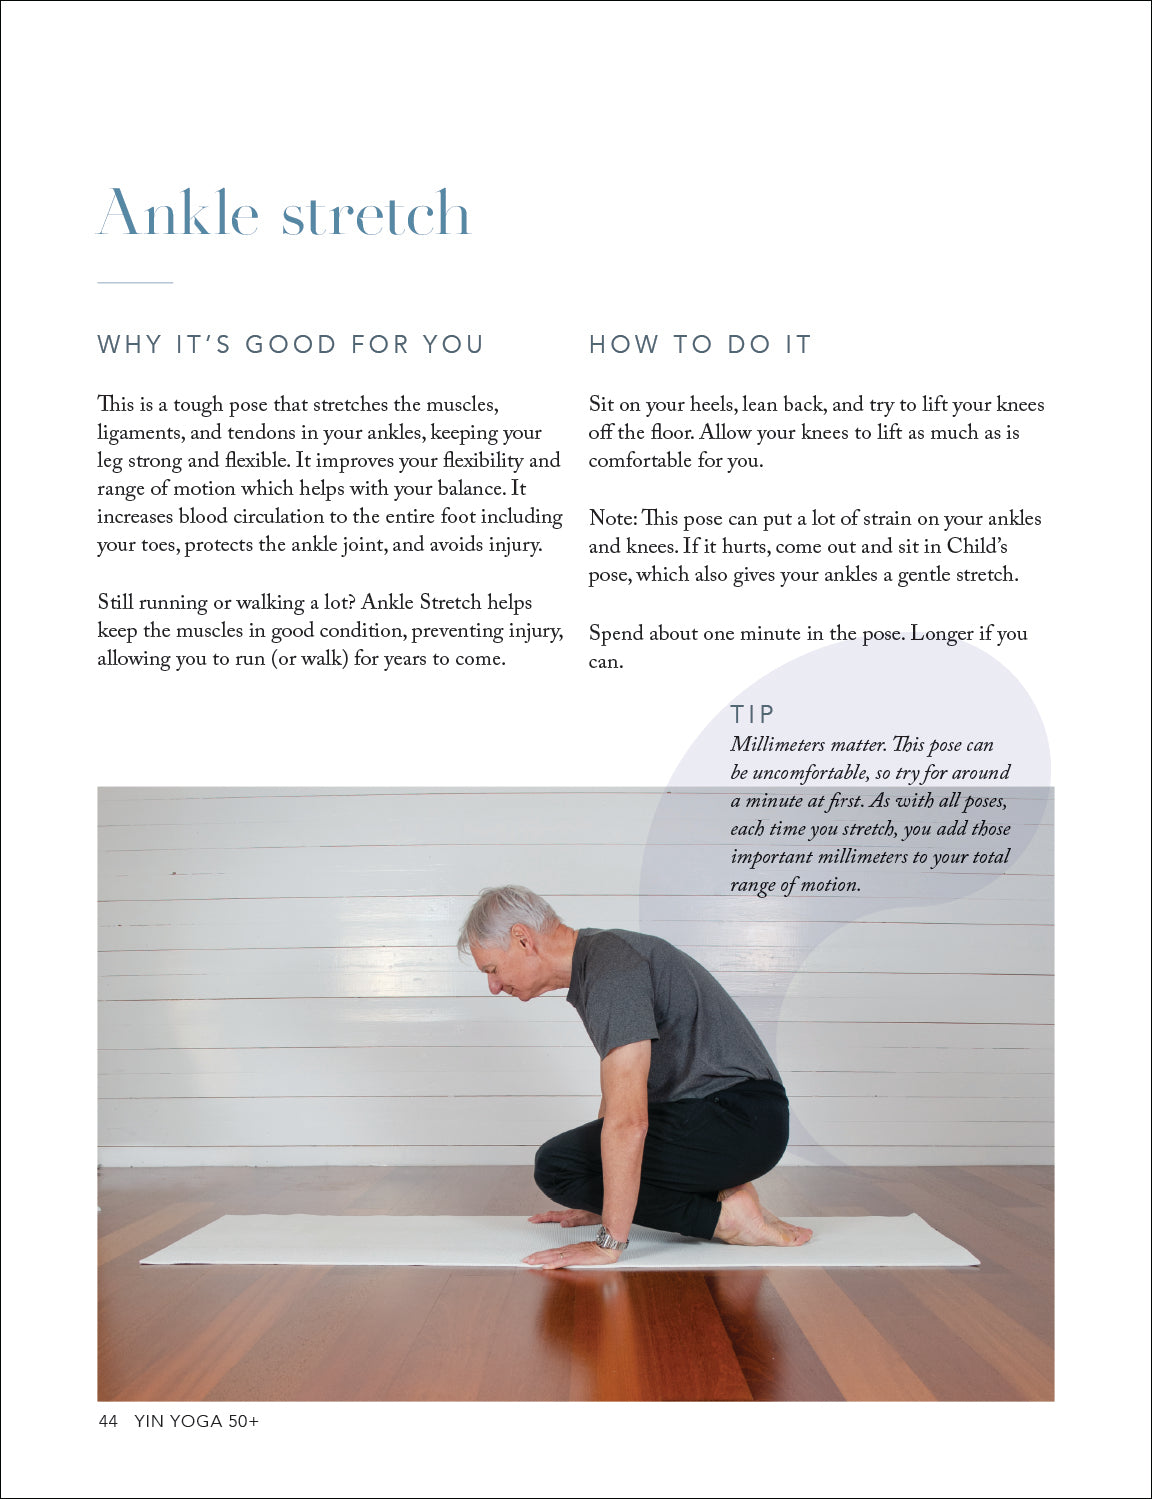 Stretch It Out! Over 50 Stretching Exercises to Help Improve Your